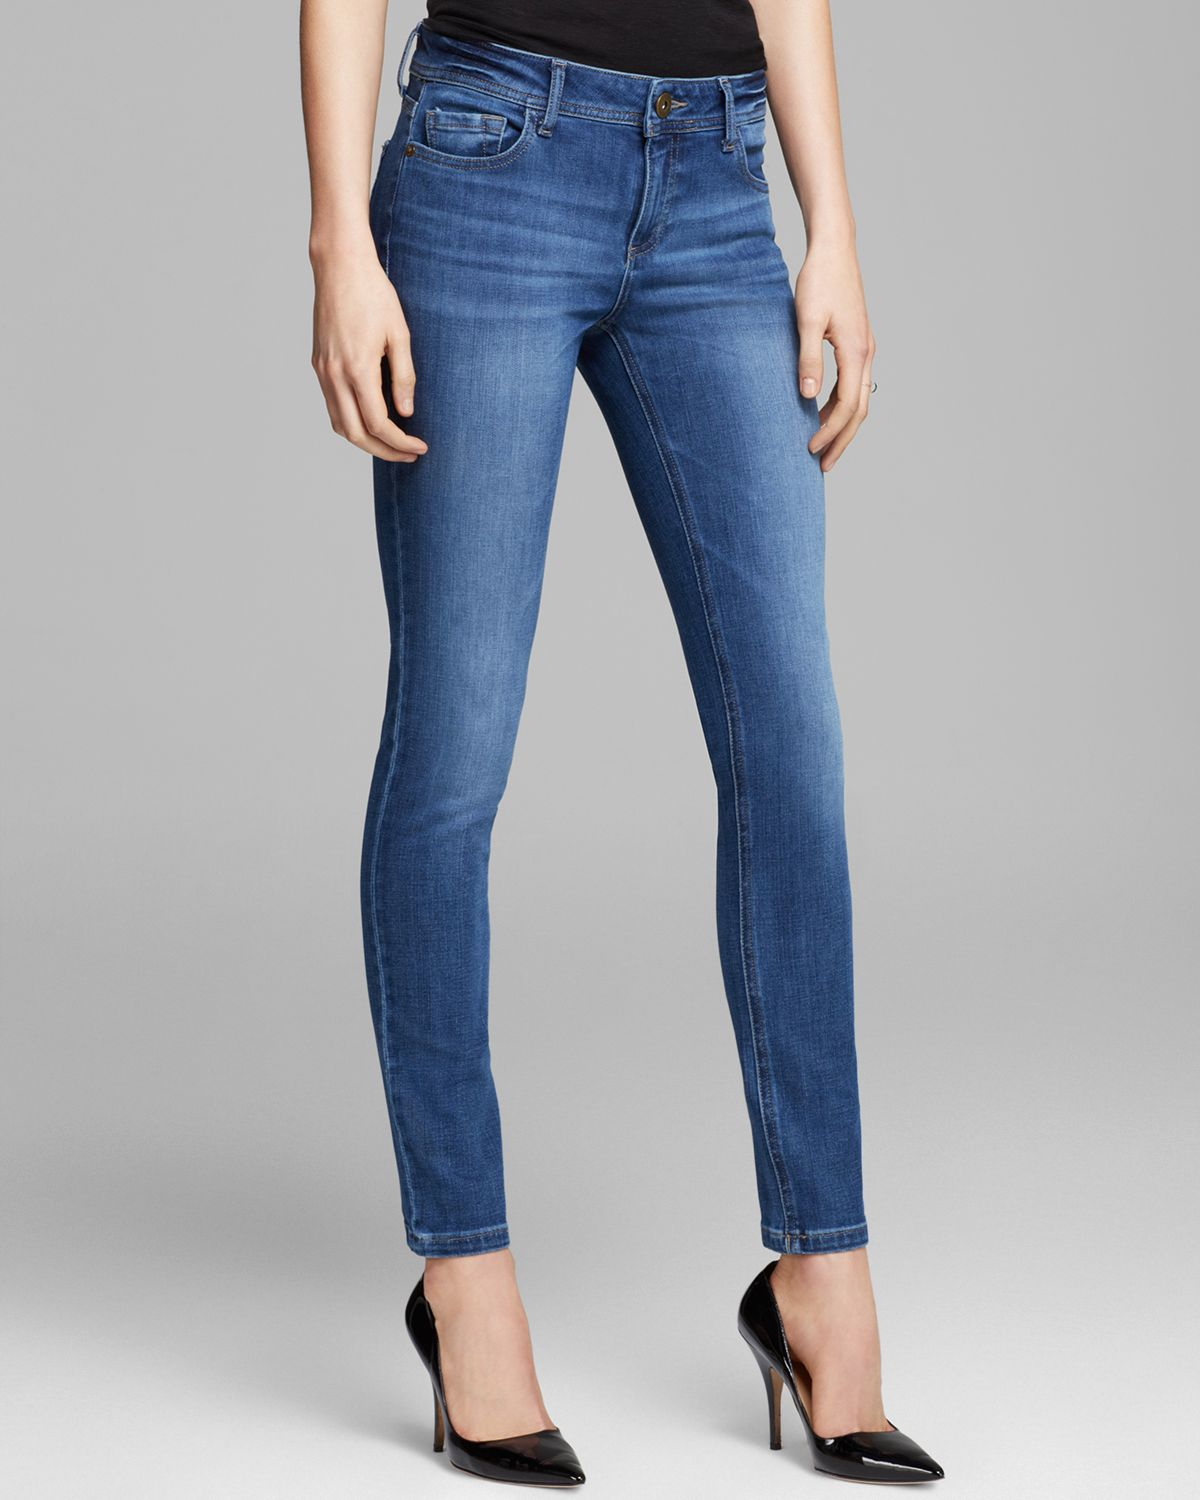 Dl1961 Jeans Florence Instasculpt Skinny in Pacific in Blue (Pacific ...